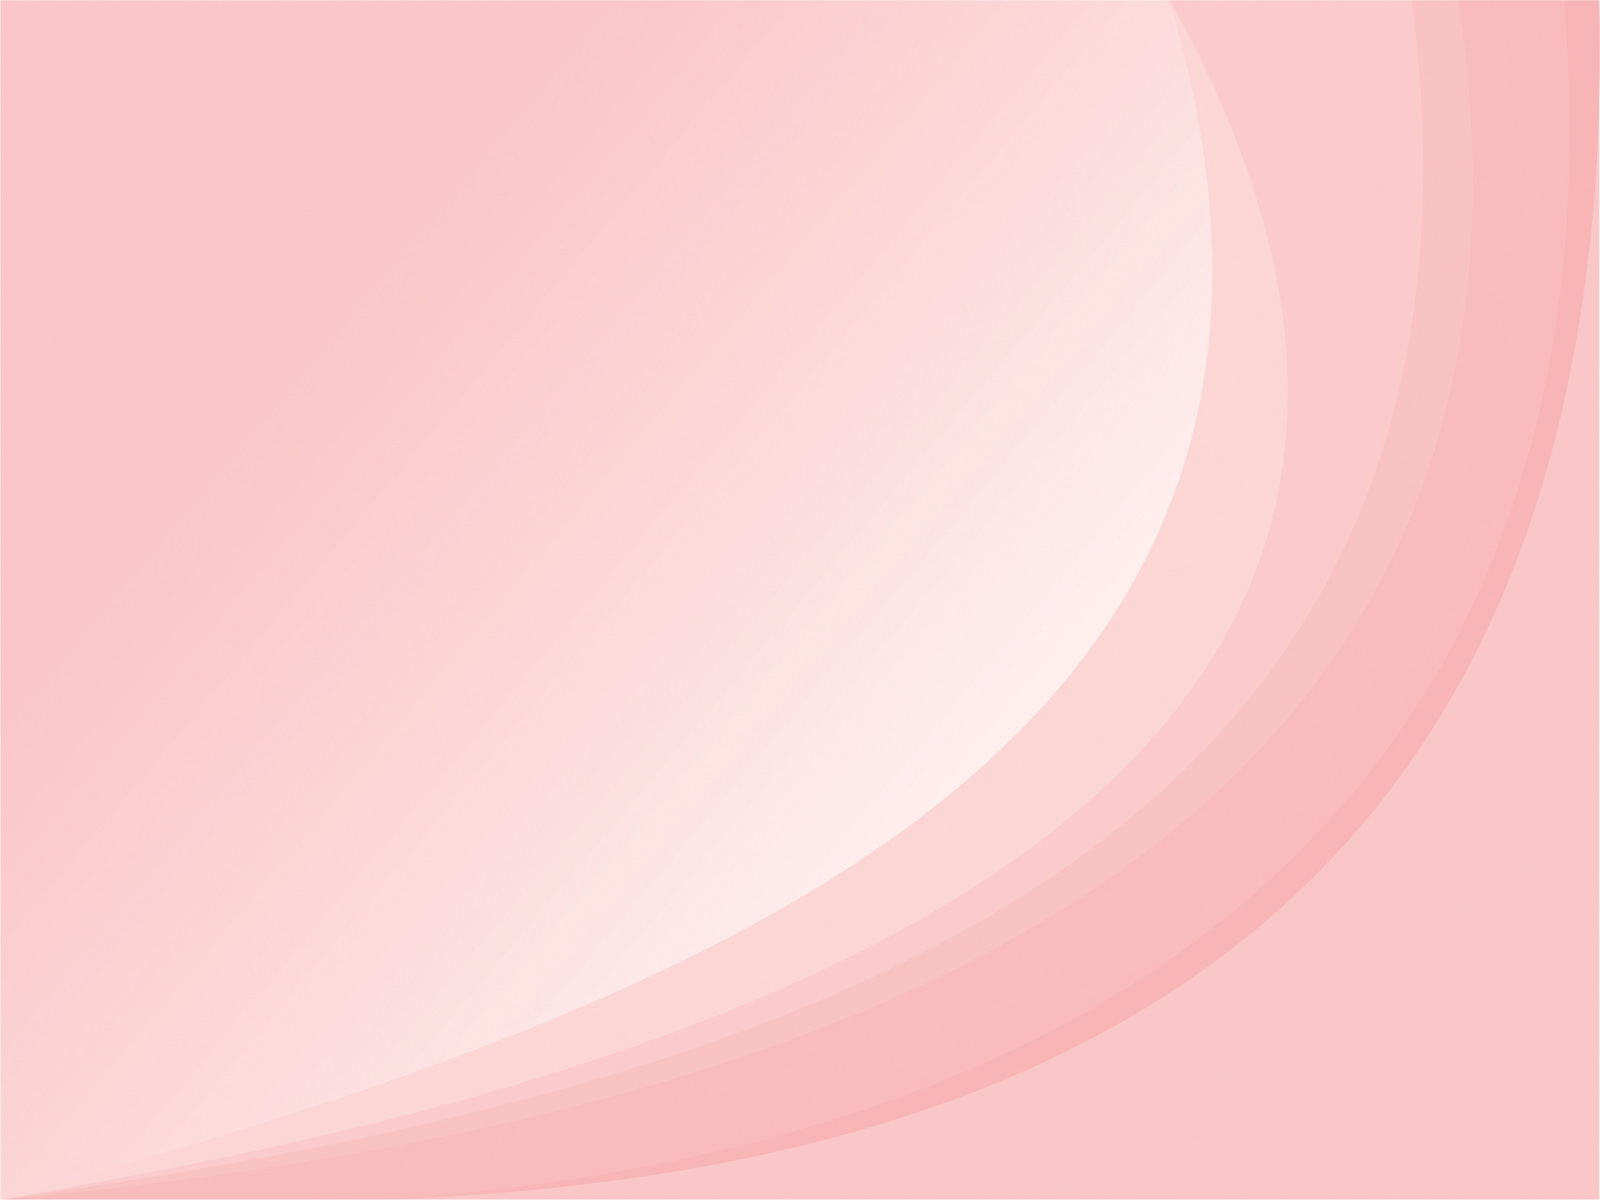 Waves Pink Template Free PPT Backgrounds and Templates